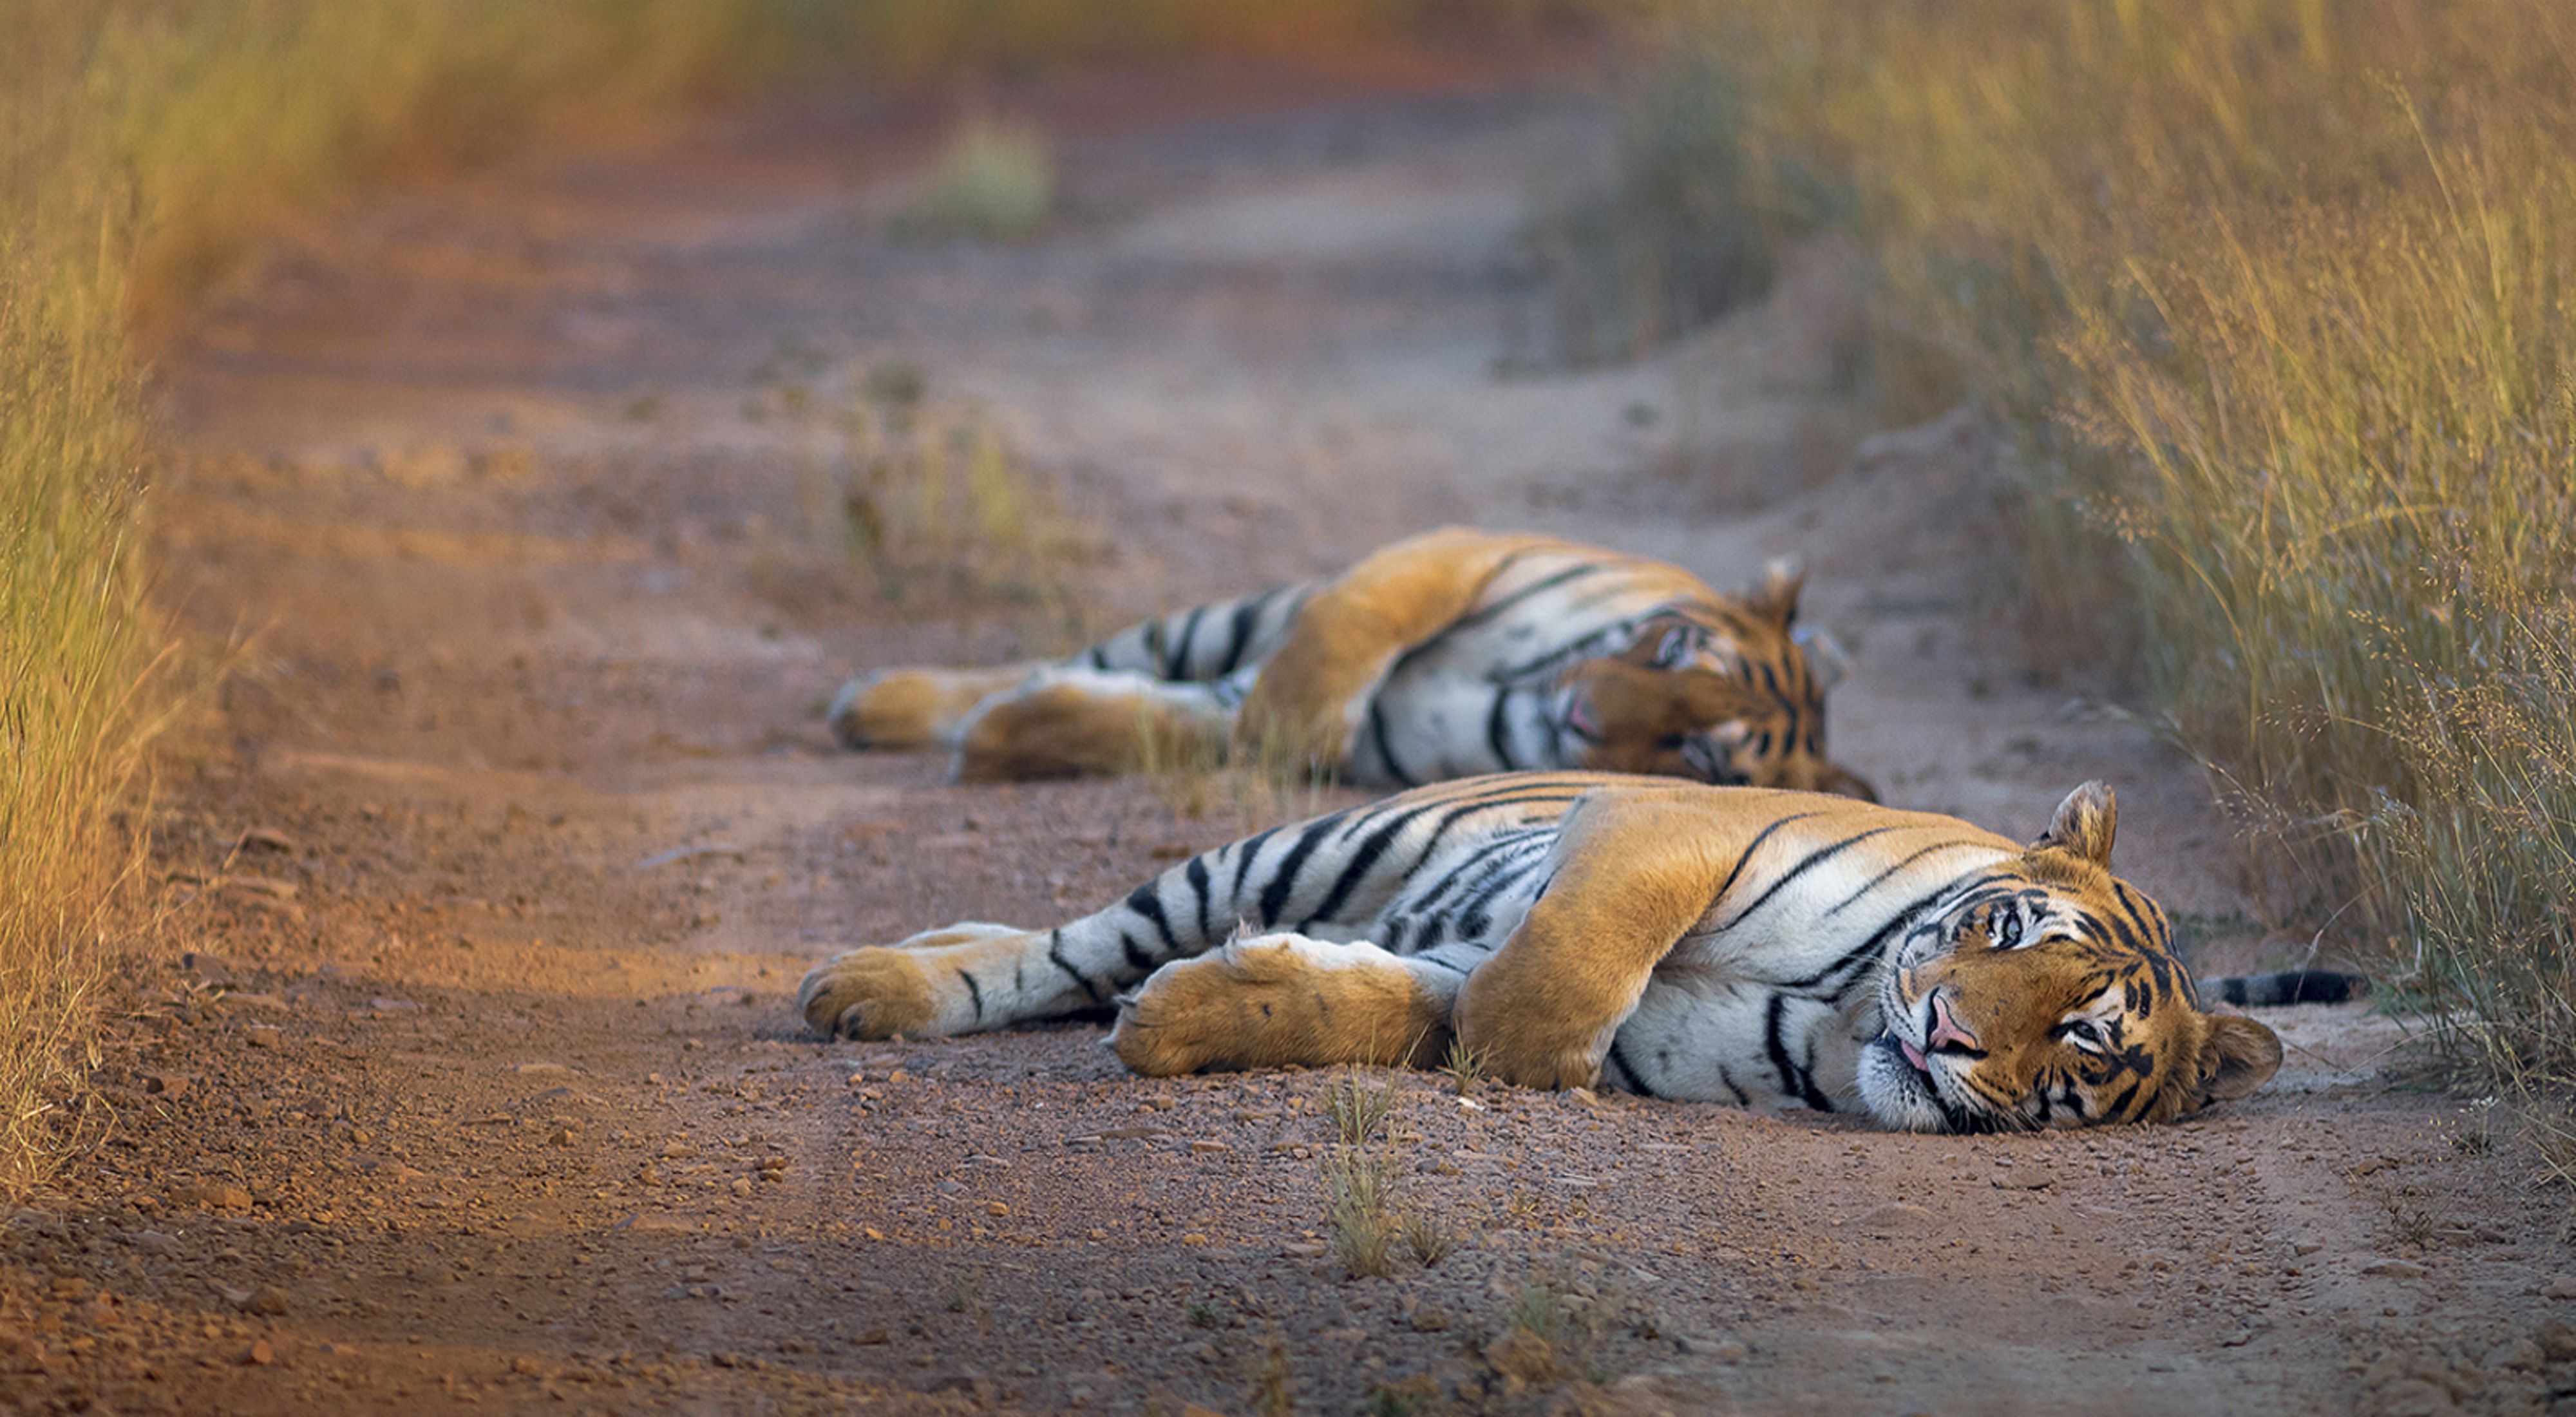 Two young adult tiger cubs rest in the early morning light at Tadoba Andhari Tiger Reserve, India.